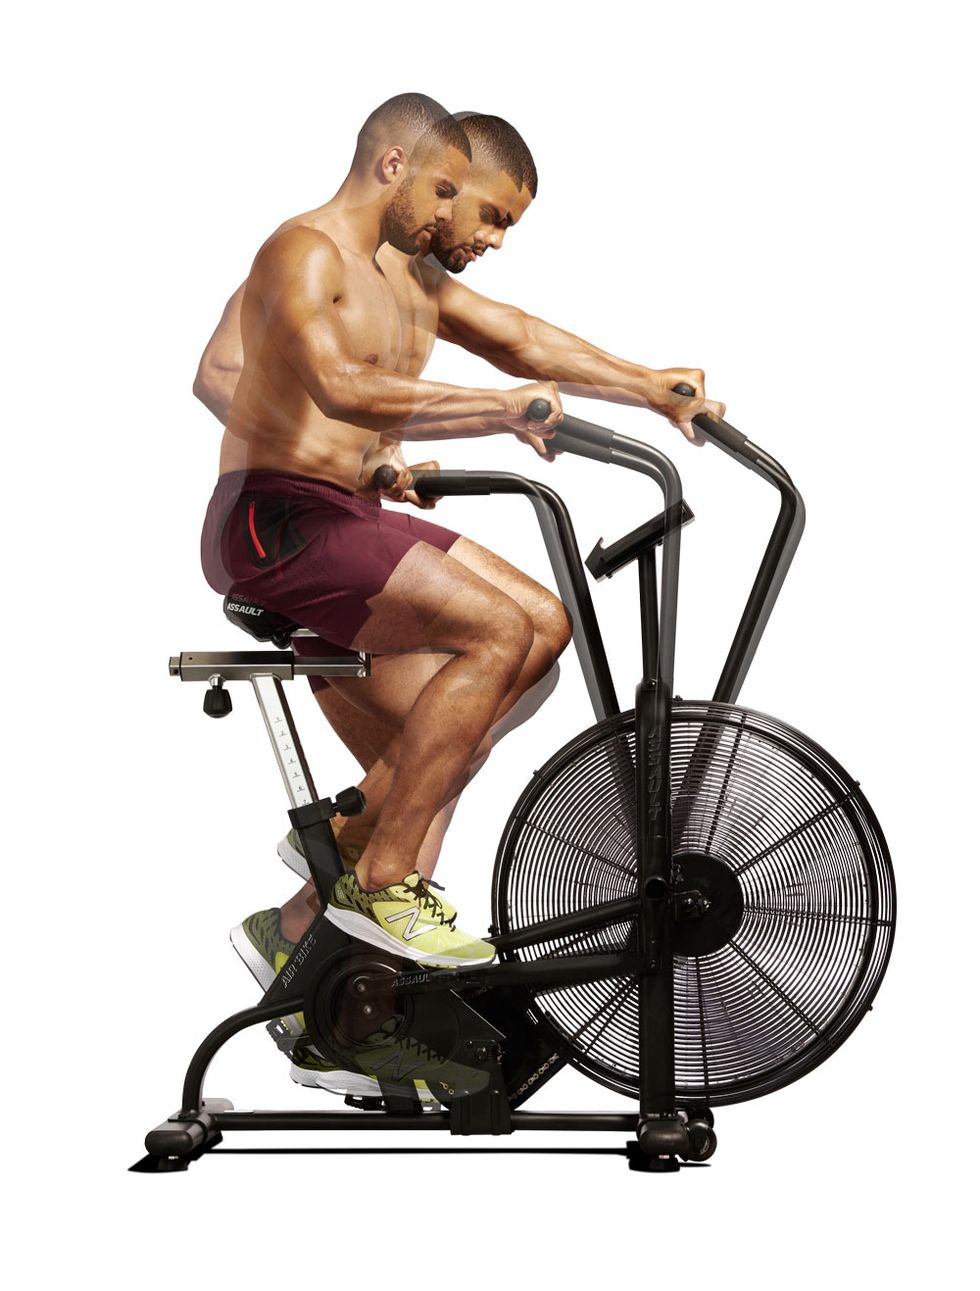 Exercise machine, Exercise equipment, Bicycle accessory, Bicycle trainer, Vehicle, Stationary bicycle, Muscle, Bicycle wheel, Bicycle, Sports equipment, 